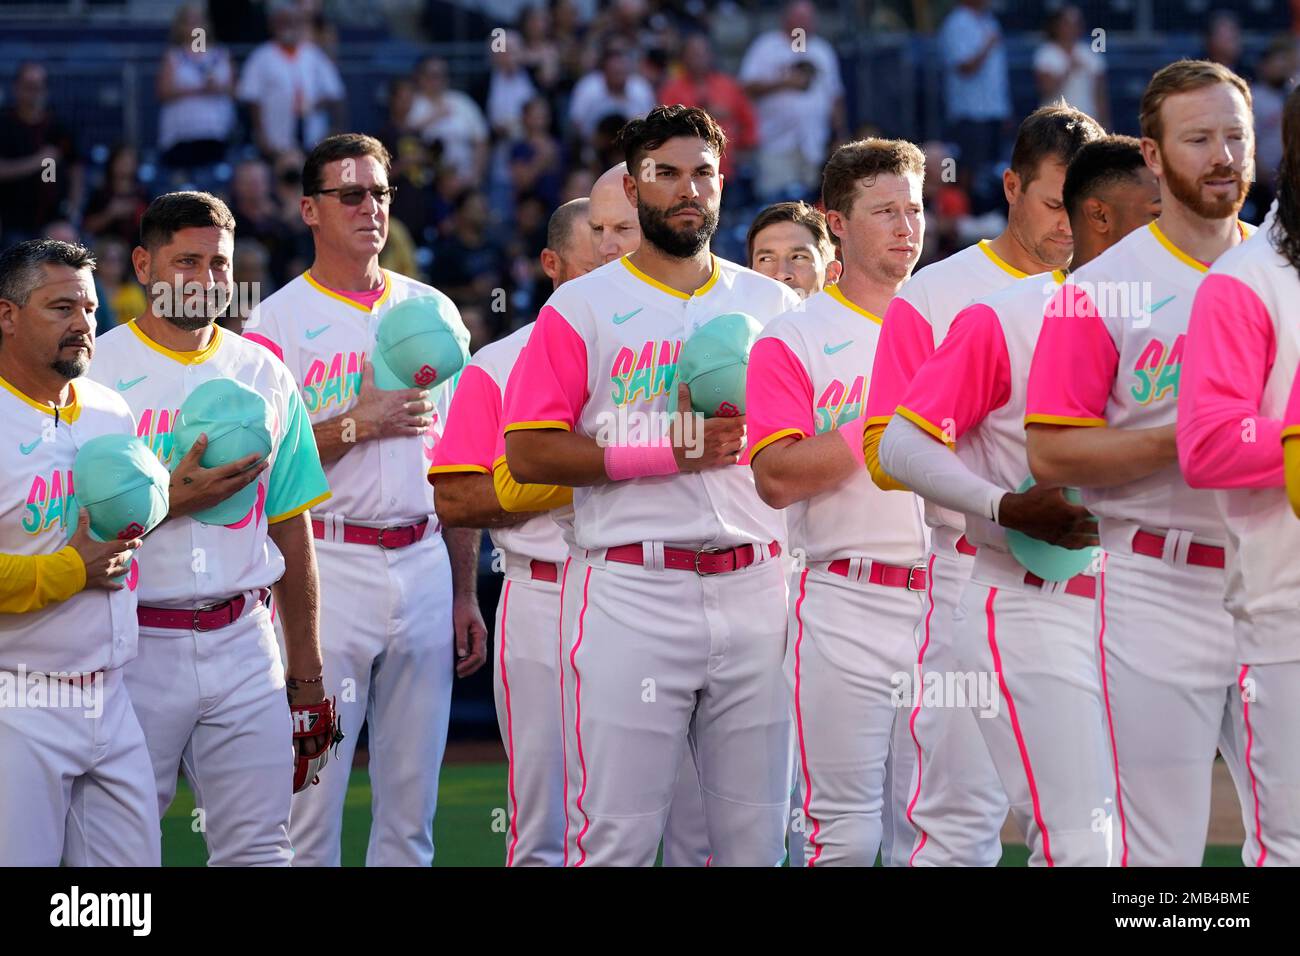 Members of the San Diego Padres wear City Connect uniforms before a  baseball game against the San Francisco Giants, Friday, July 8, 2022, in  San Diego. (AP Photo/Gregory Bull Stock Photo - Alamy